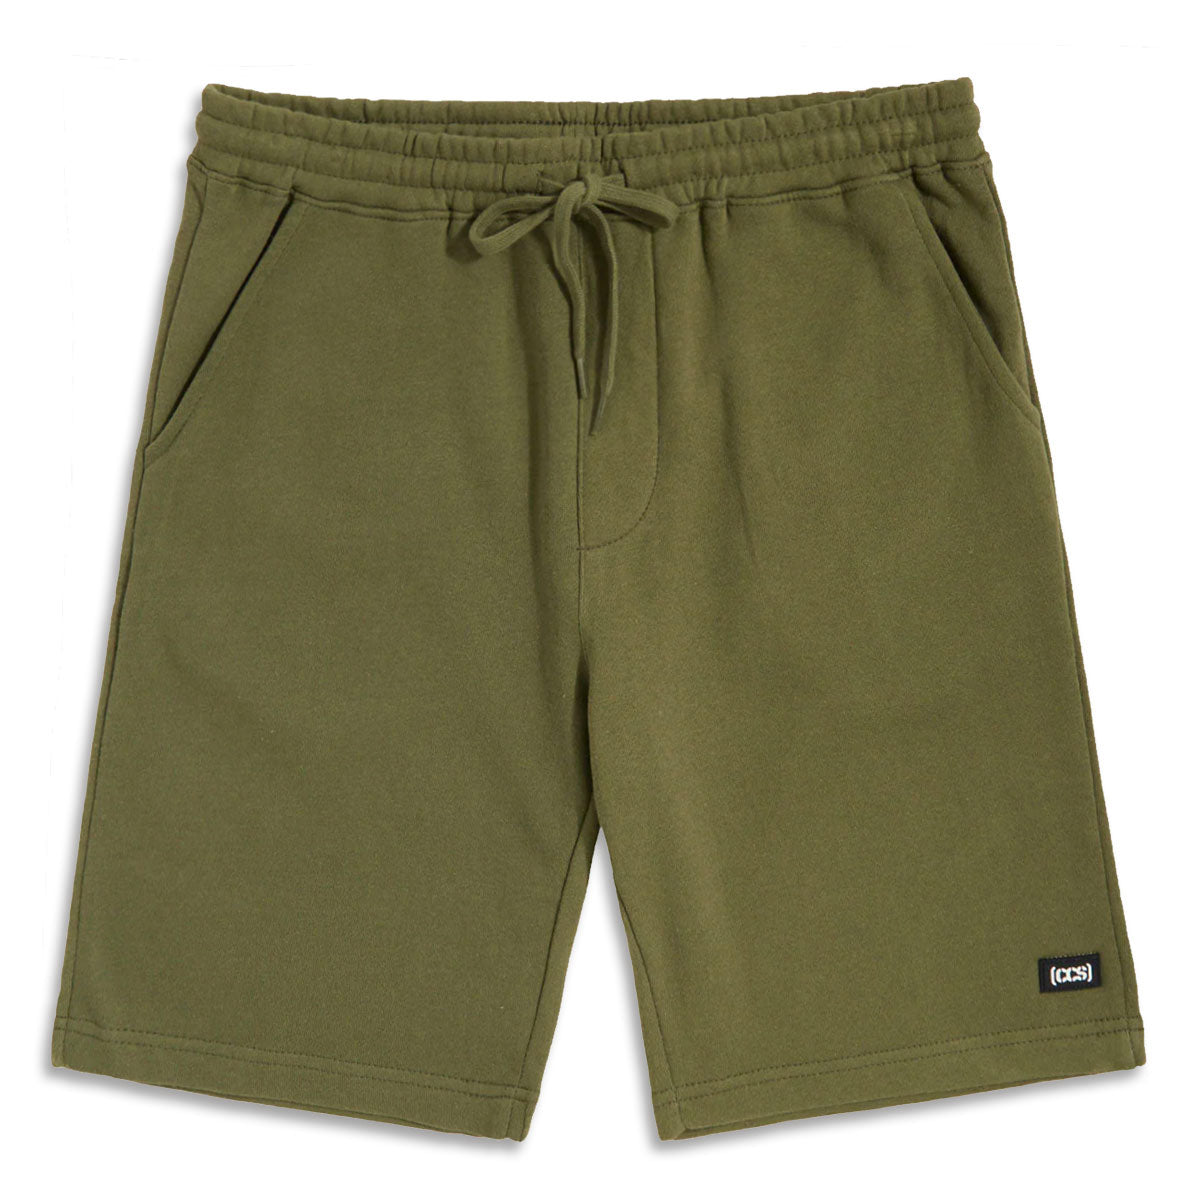 CCS Logo Rubber Patch Sweat Shorts - Army Green image 1